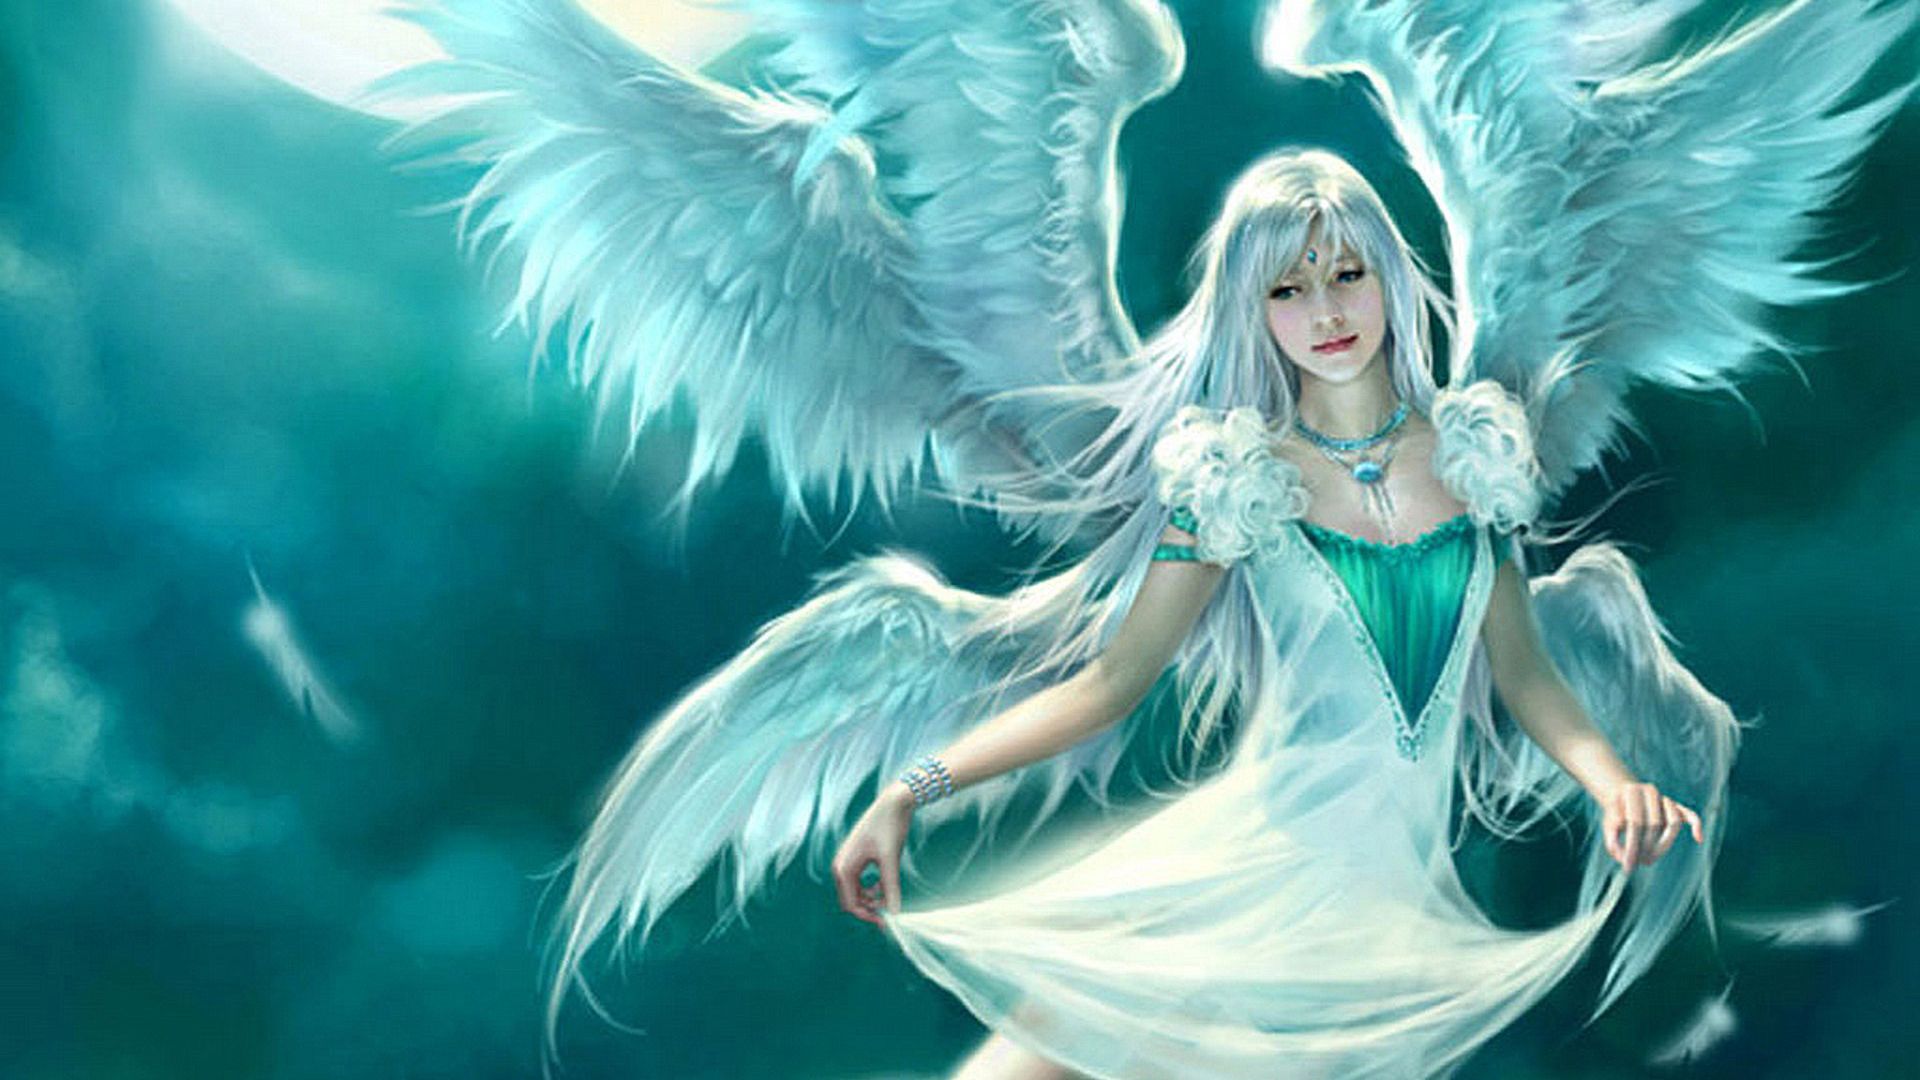 Angel Full HD Wallpapers Free Download. 